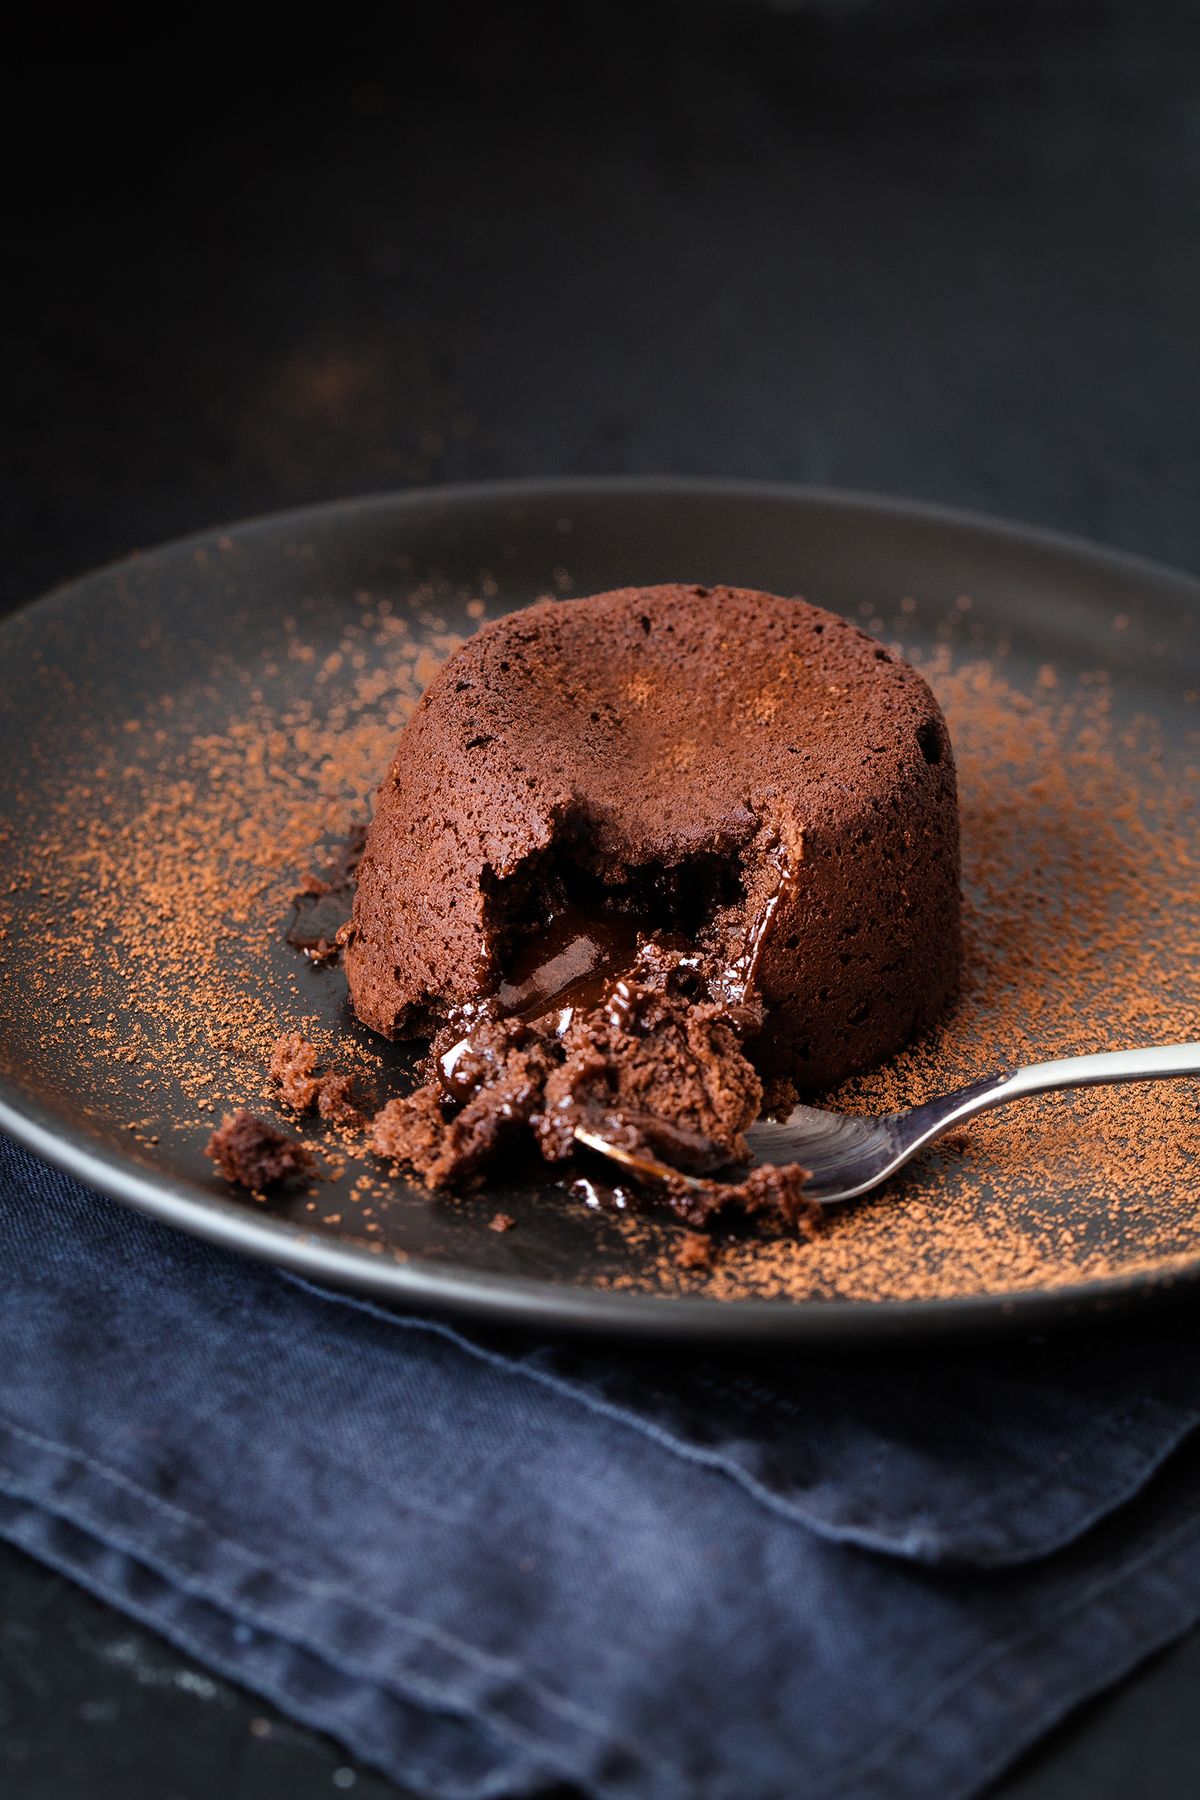 Chocolate,Fondant,With,On,Black,Plate